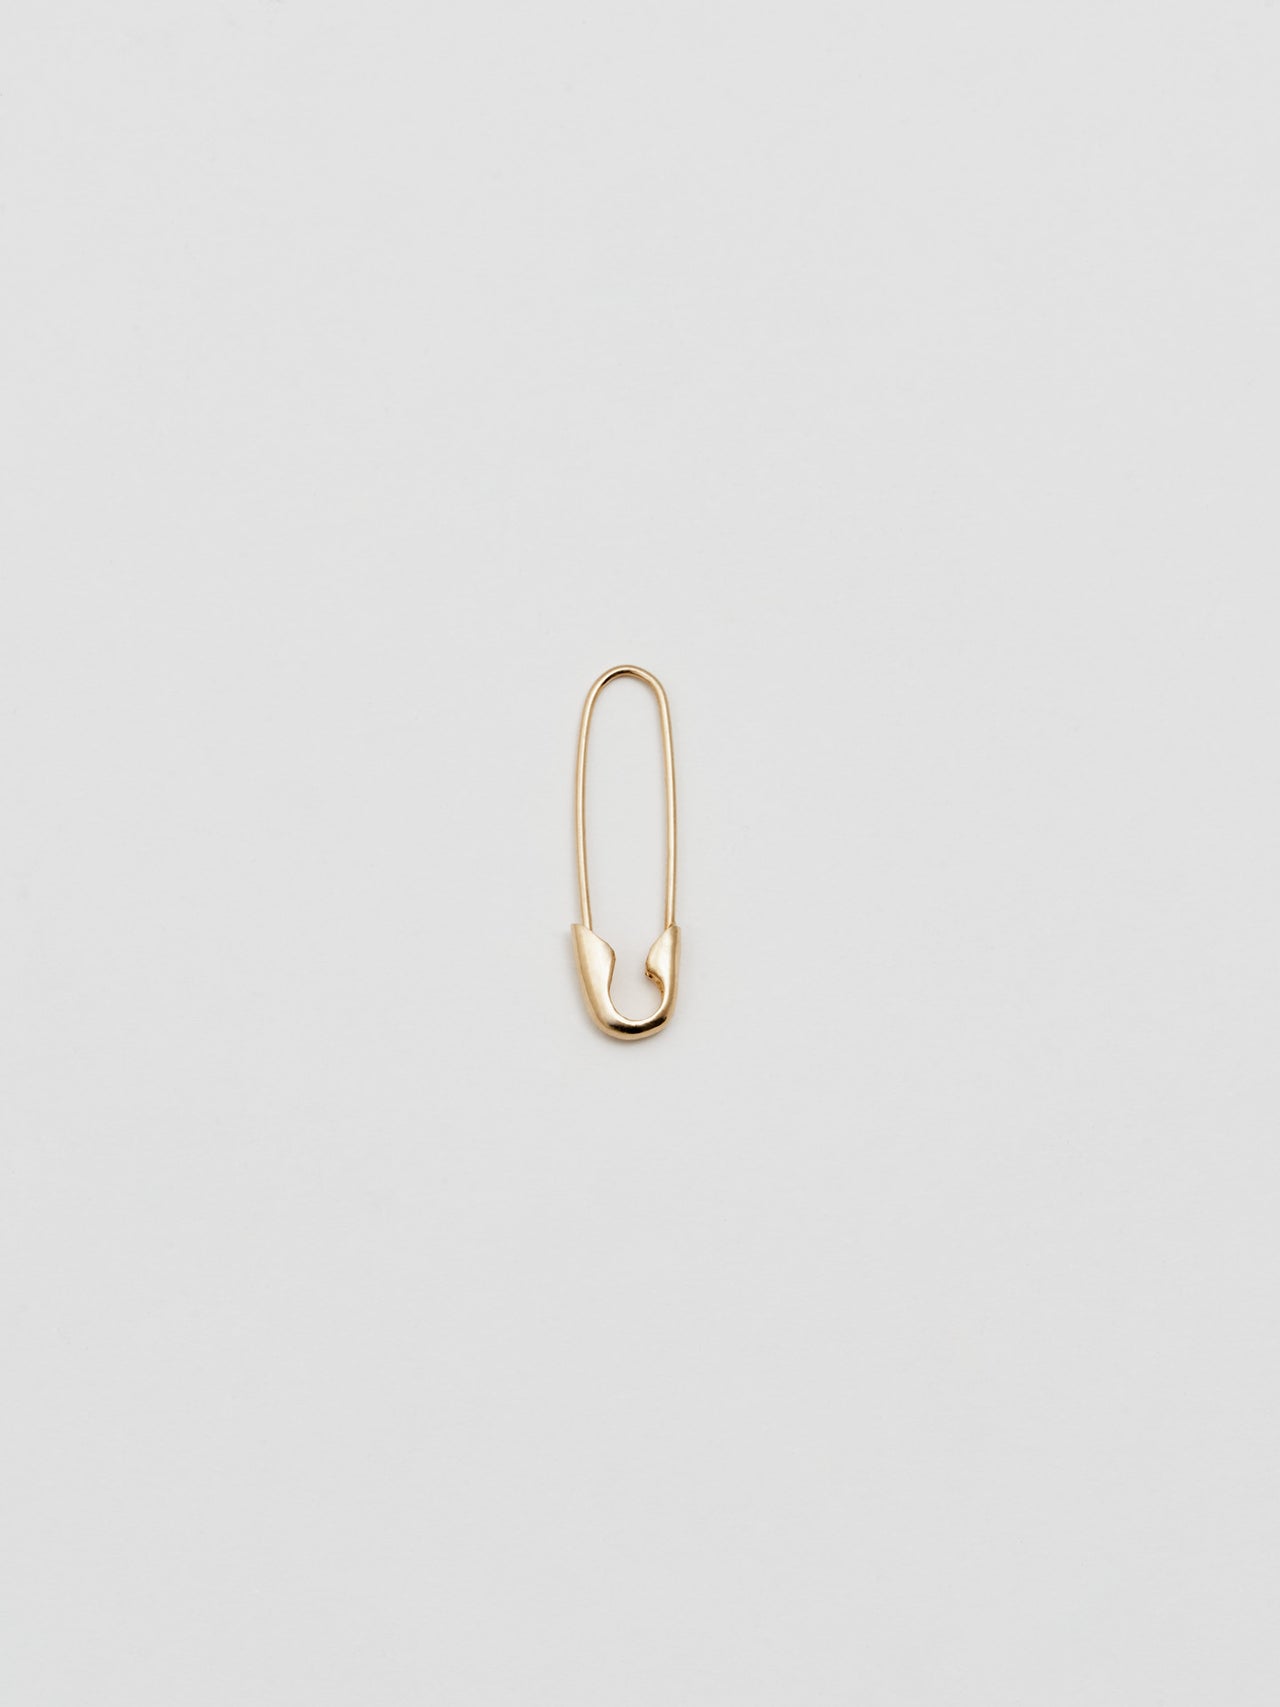 Product shot of the Safety Pin Earring (14Kt Shiny Yellow Gold Safety Pin Earring  Length: 21.35mm) Background: Grey backdrop